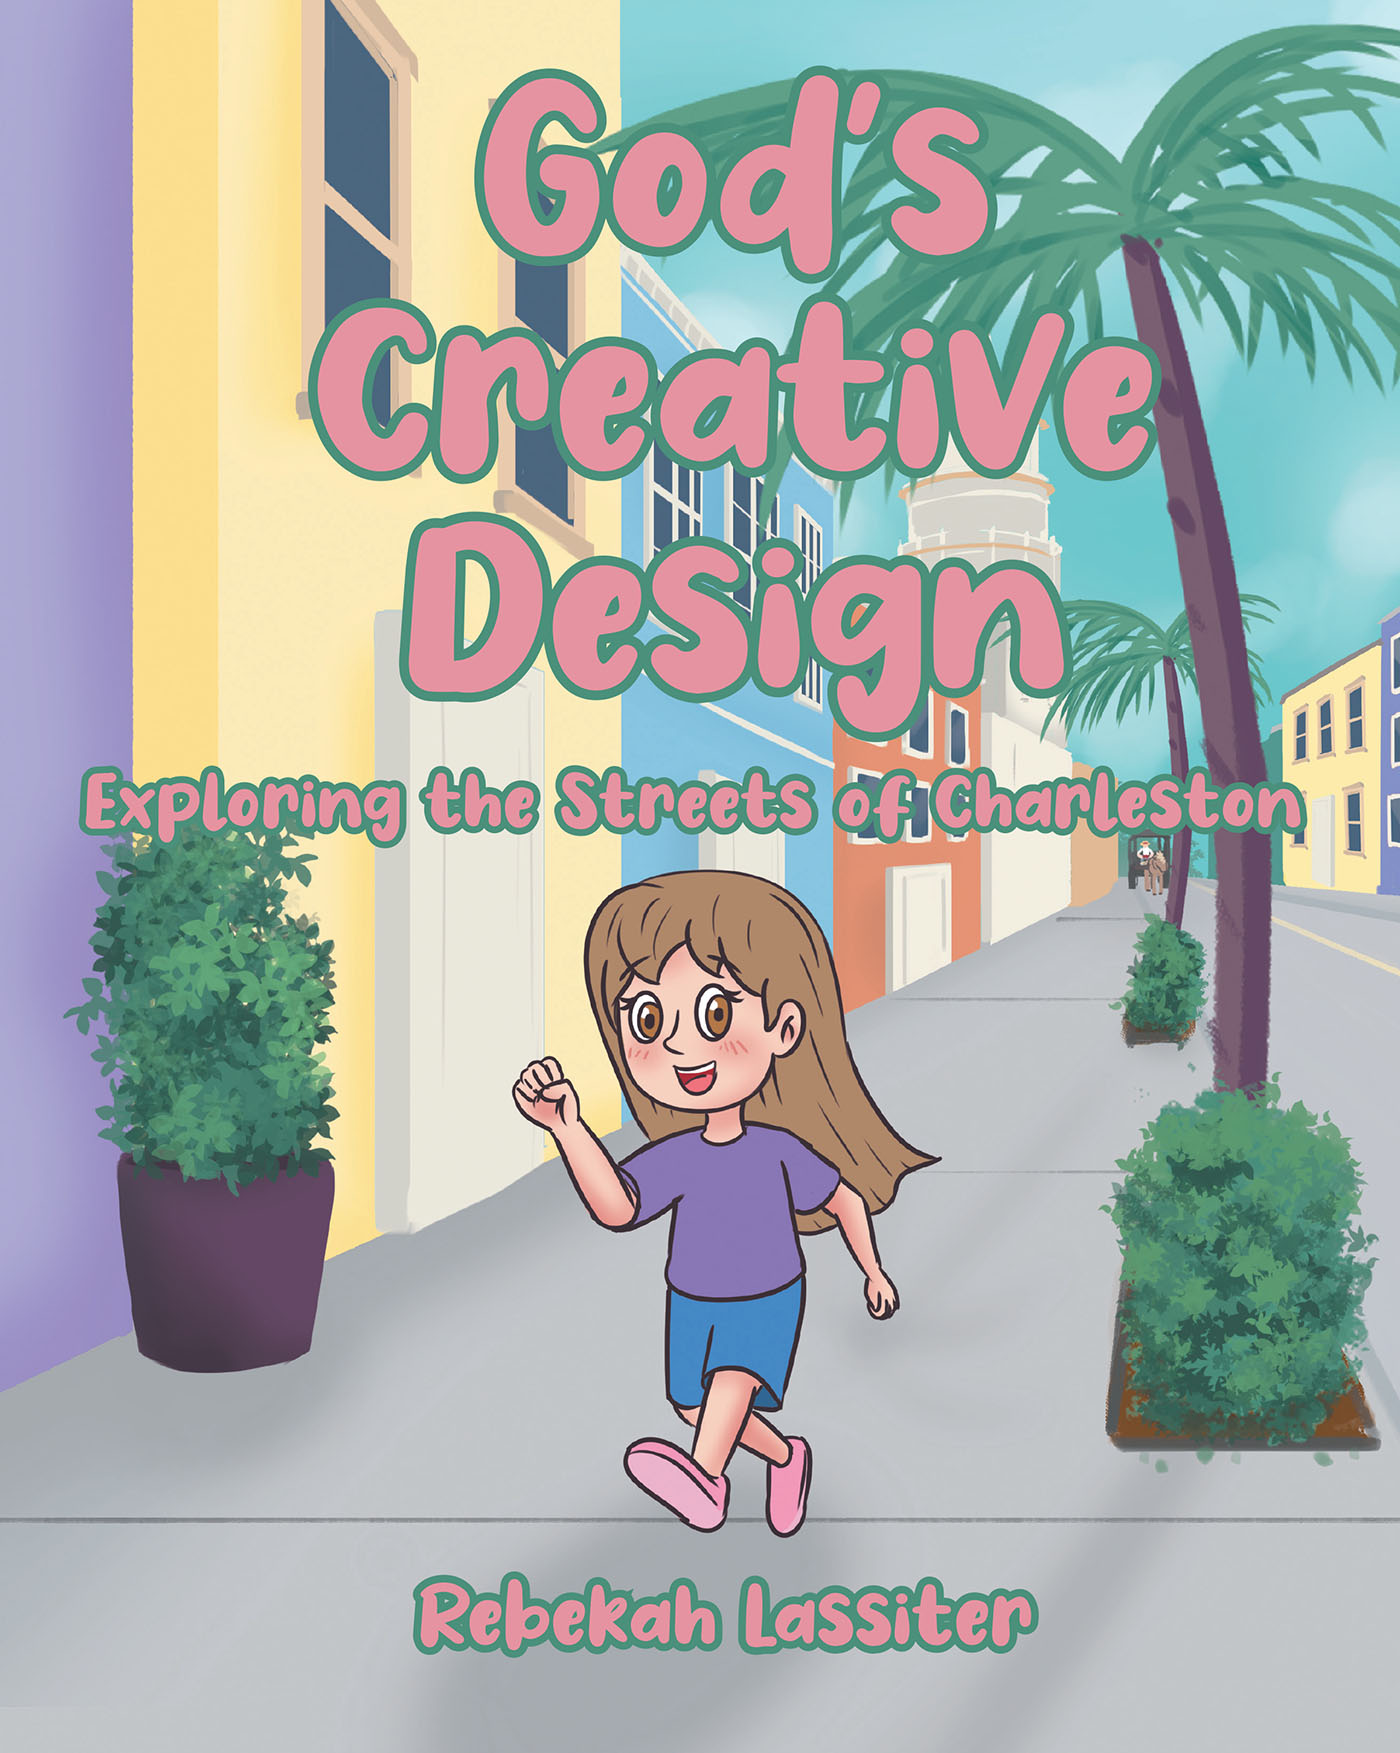 Author Rebekah Lassiter’s New Book "God’s Creative Design: Exploring the Streets of Charleston" is a Beautifully Engaging Children’s Story That Celebrates God’s Creation